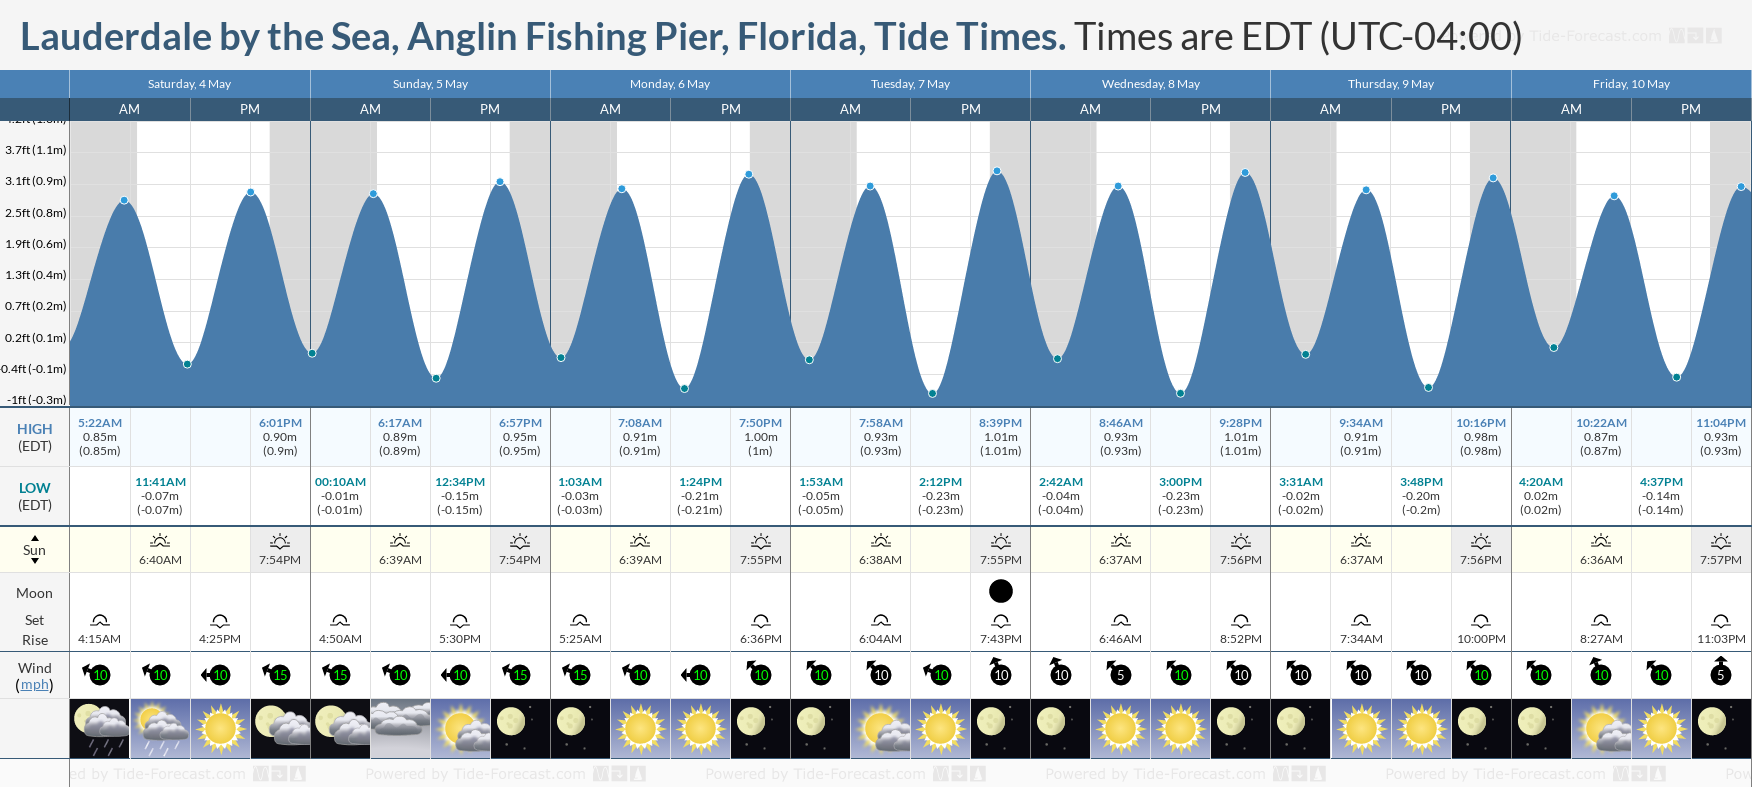 Lauderdale by the Sea, Anglin Fishing Pier, Florida Tide Chart including high and low tide times for the next 7 days